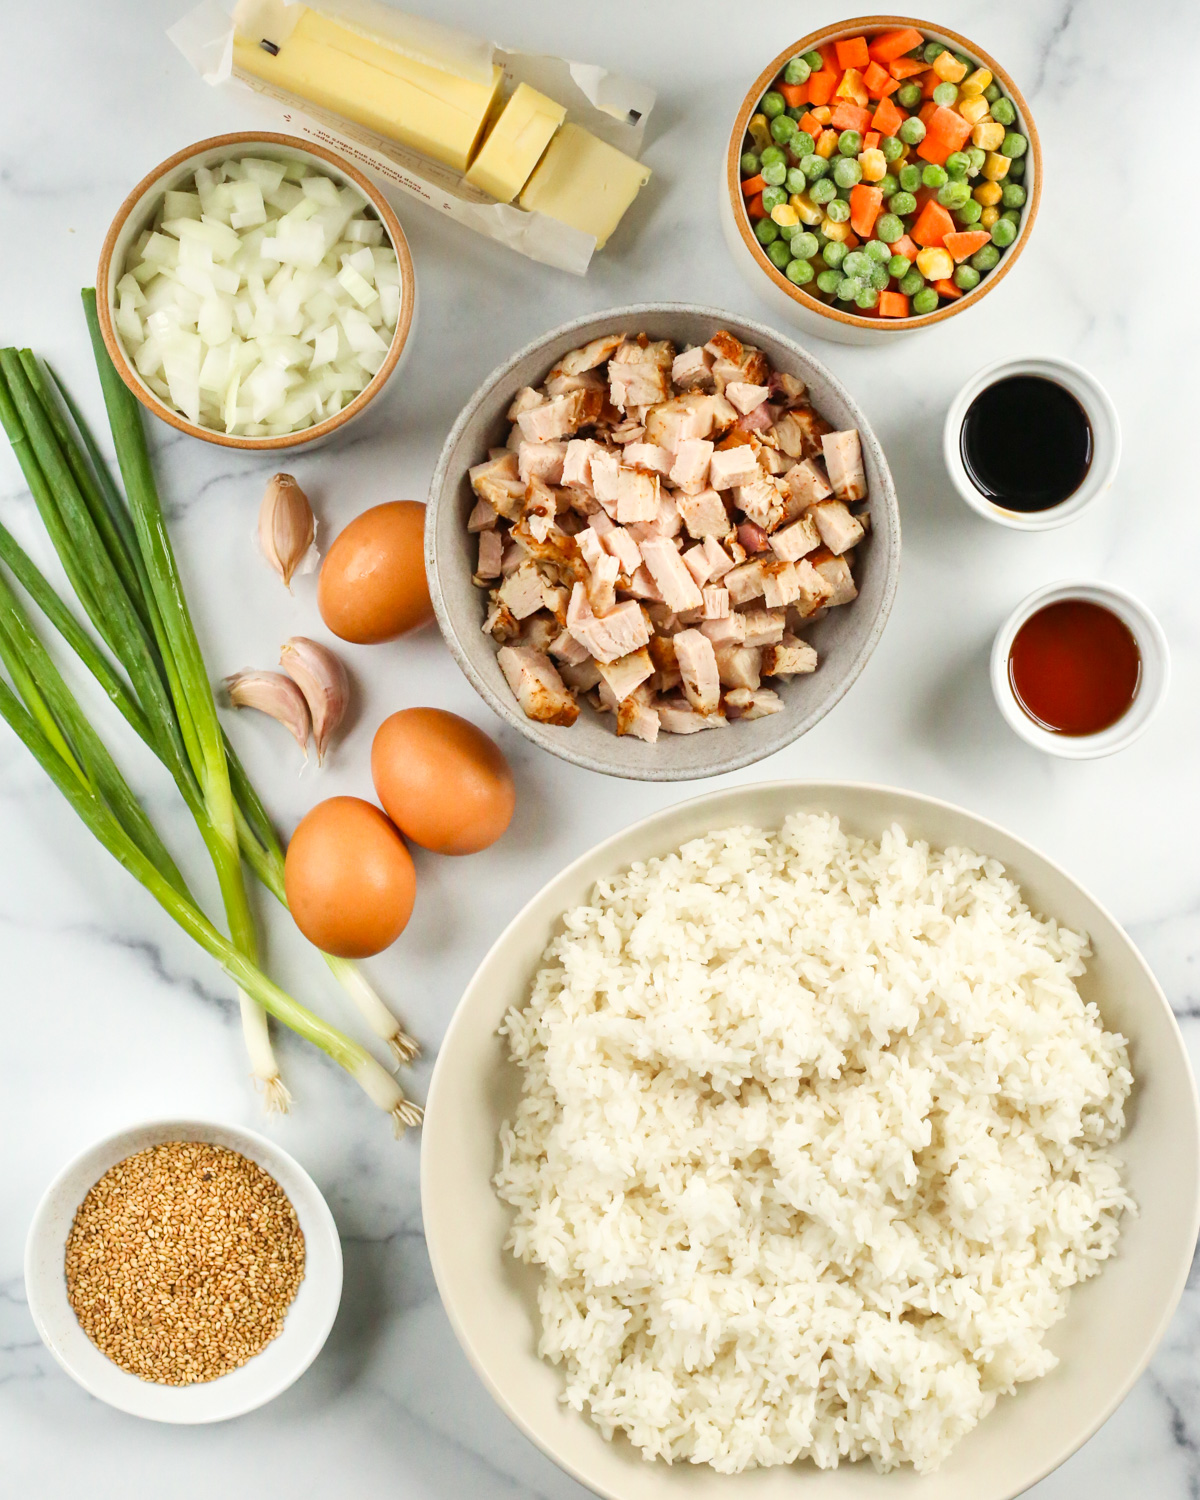 Overhead view of all the ingredients for this recipe, including cooked white rice, sesame seeds, eggs still in their brown shells, green onions, chopped white meat turkey, sesame oil, soy sauce, diced onions, garlic cloves, and a mixture of frozen veggies consisting of corn, peas, and carrots, and a stick of butter, all displayed in various sized prep bowls on a white marble kitchen countertop